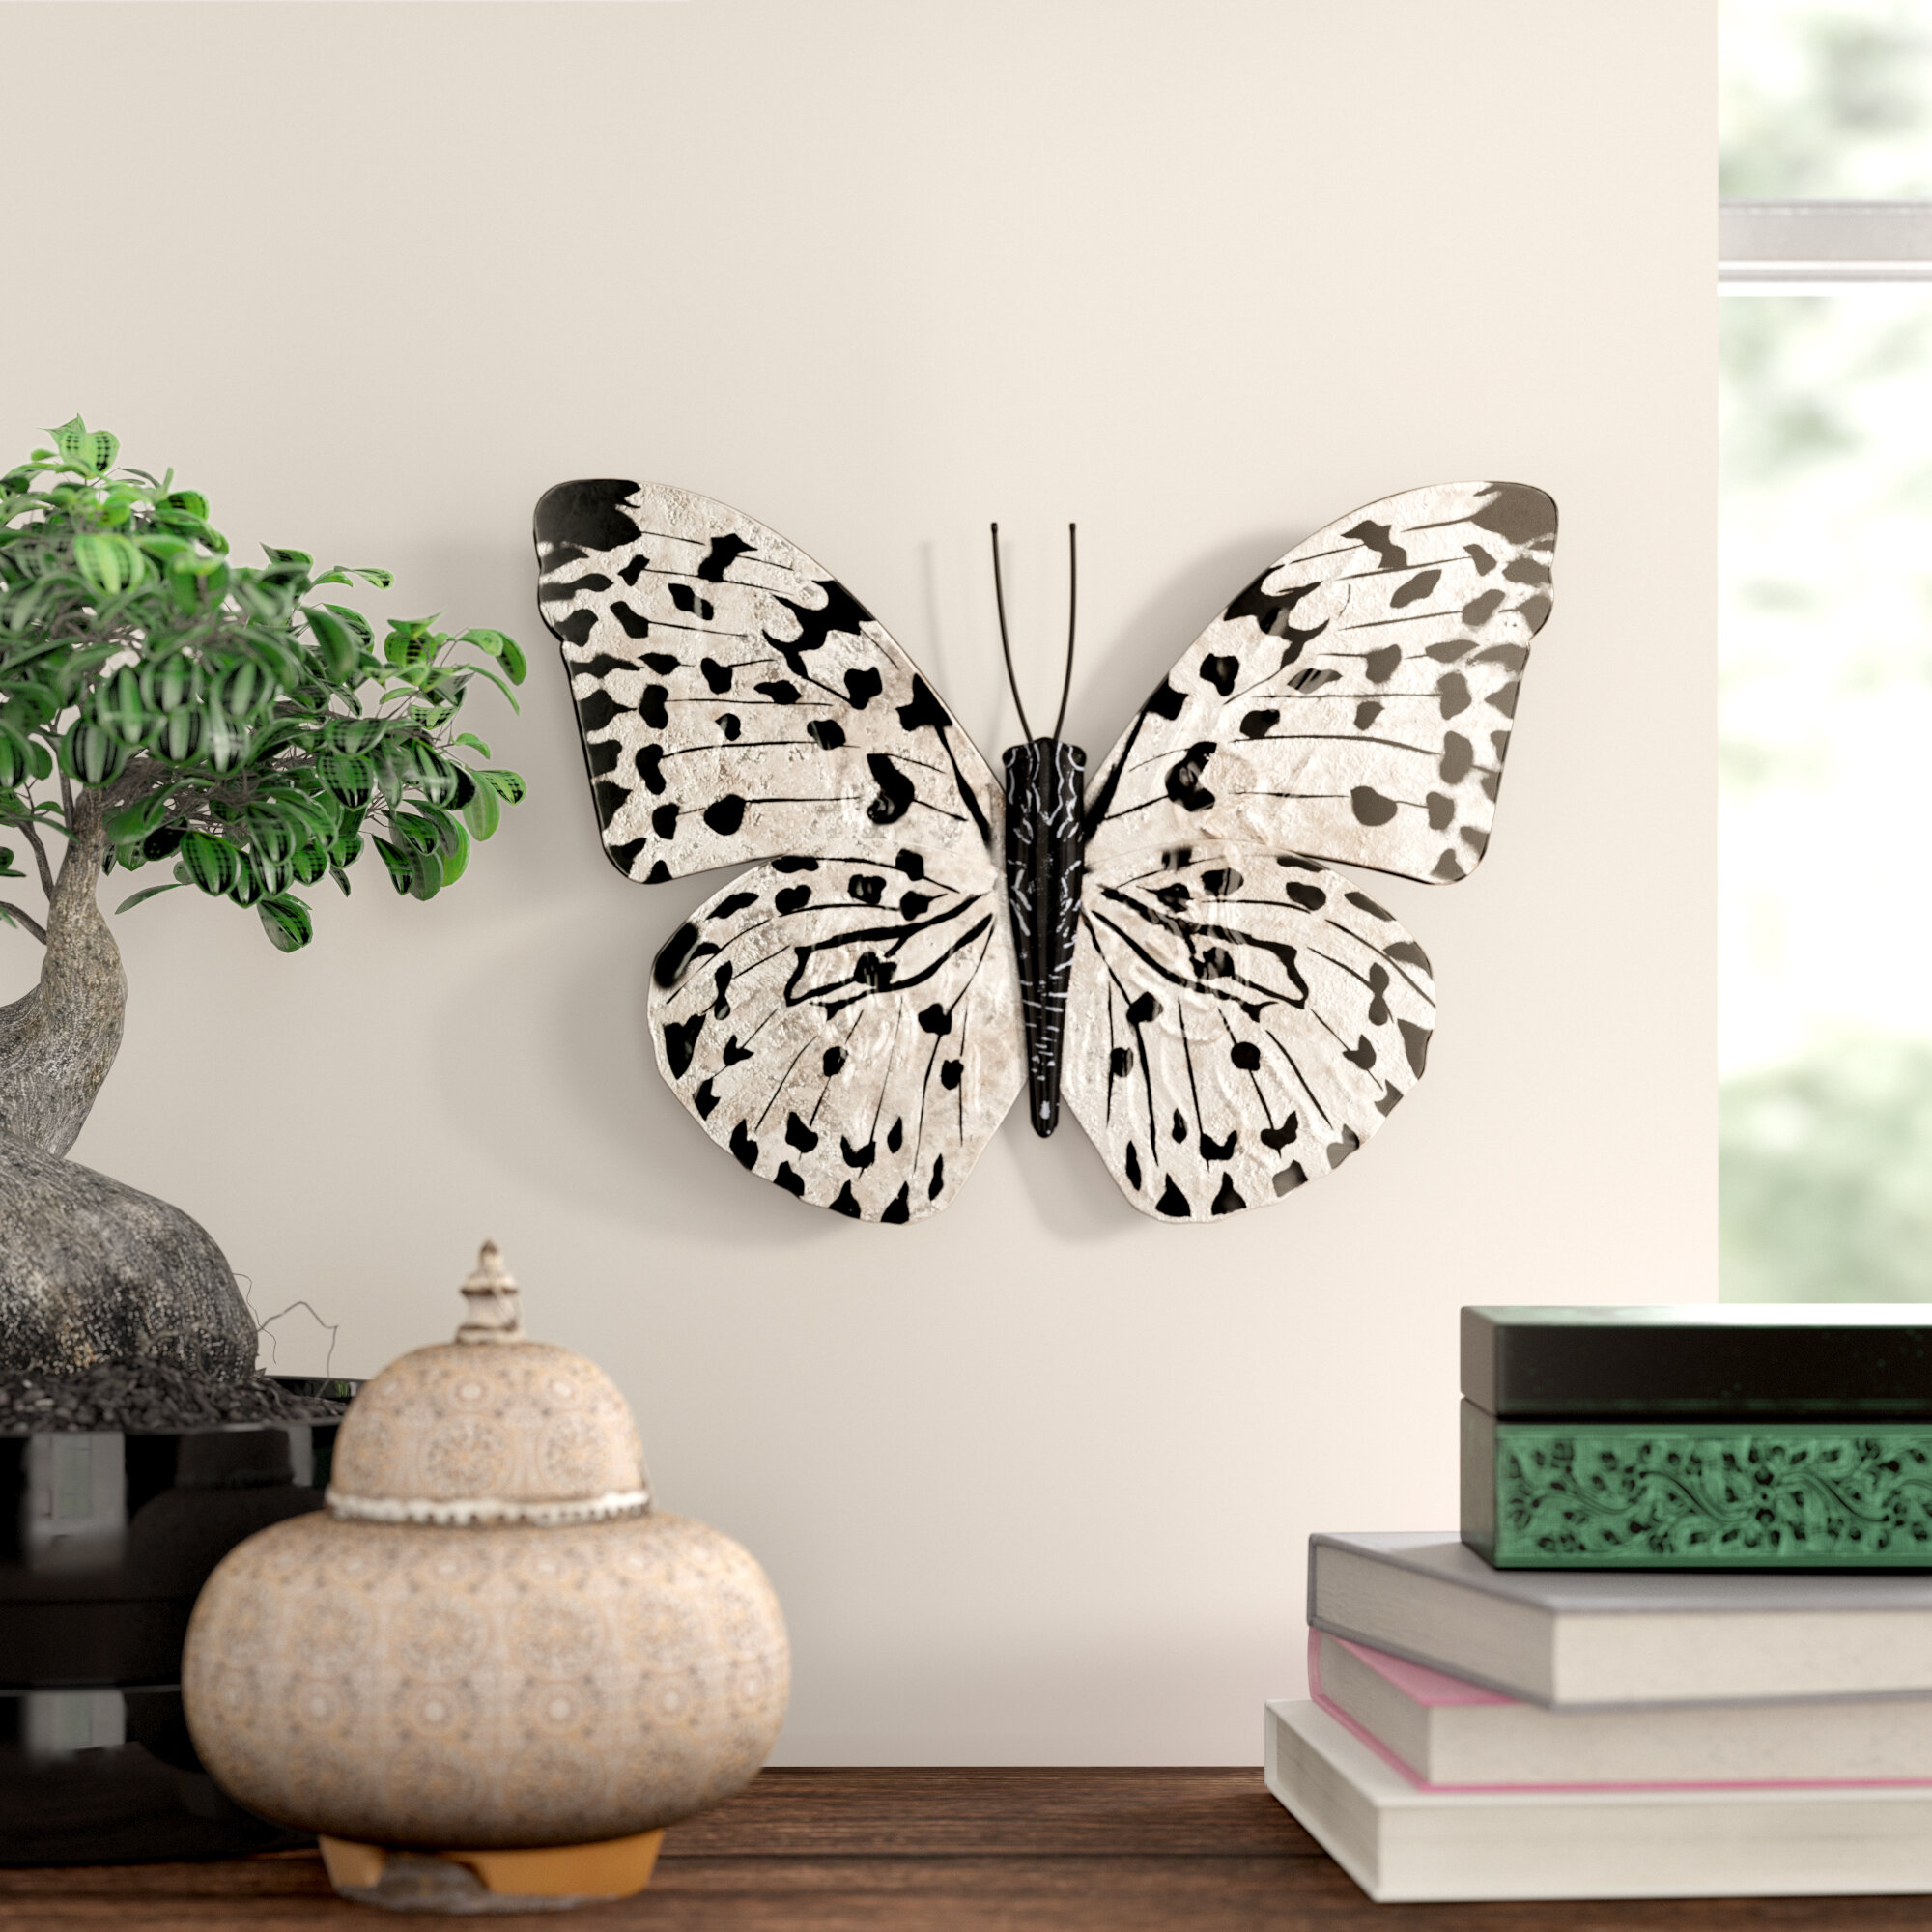 Contemporary Coastal Farmhouse Metal Wall Decor Cattails with Butterflies and Dragonflies Right